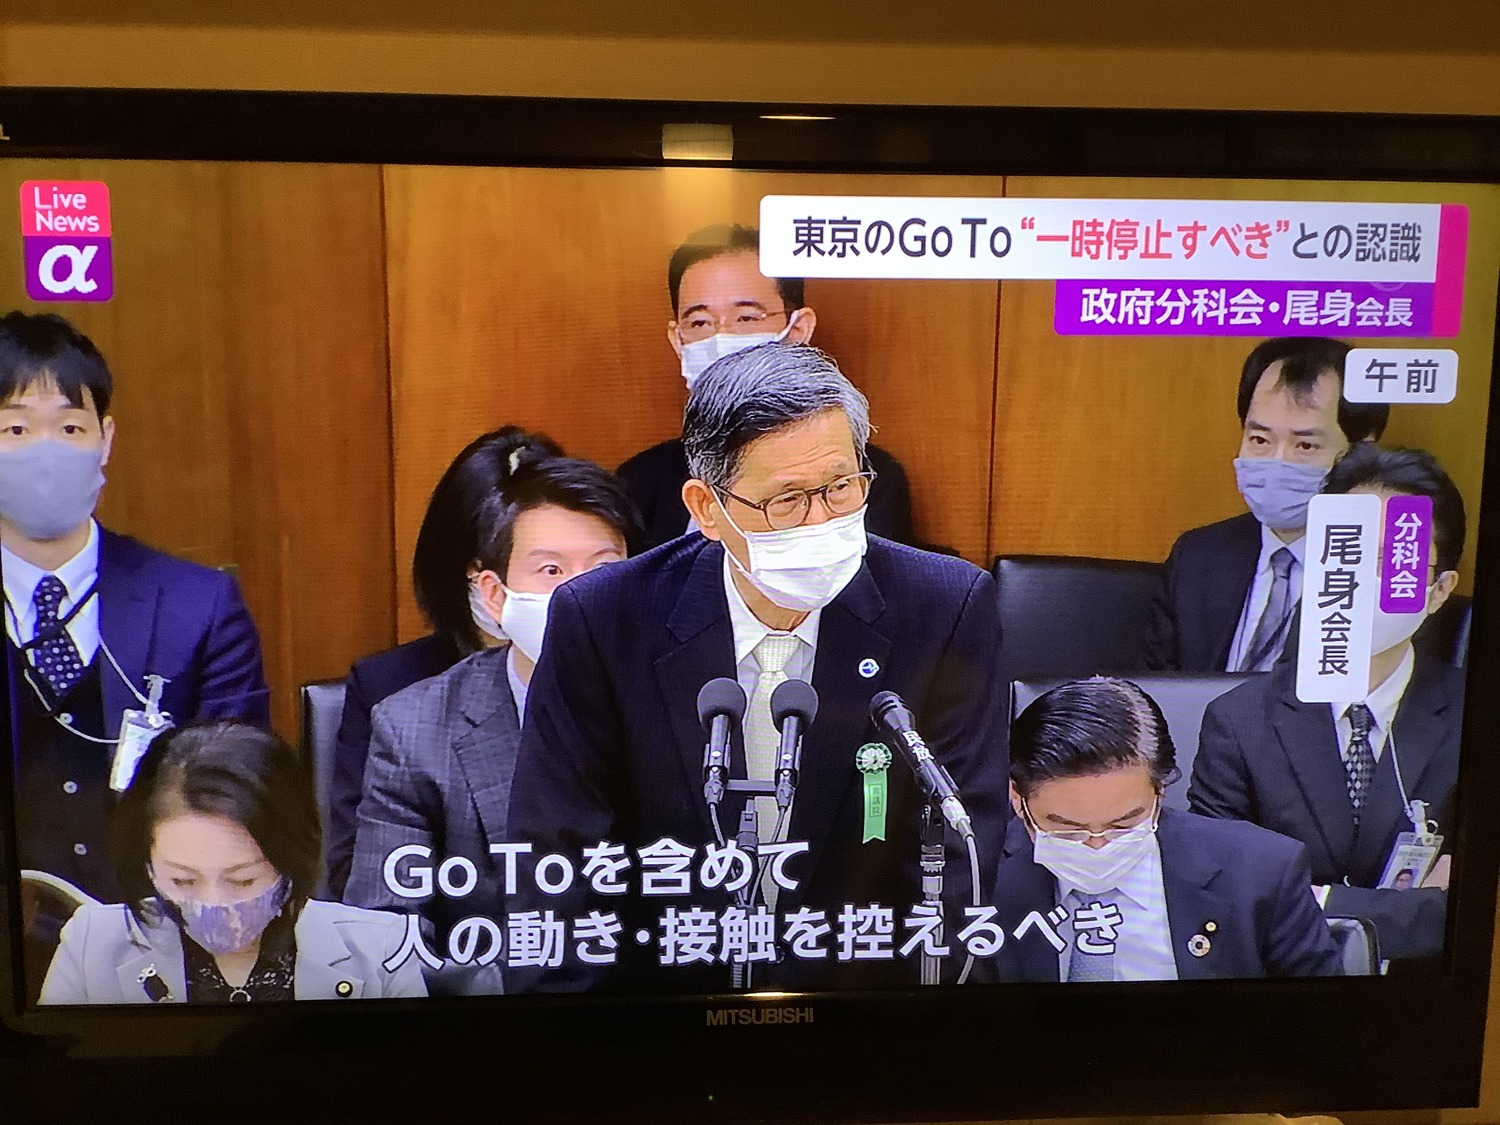 Even Shigeru Ominami, the head of the subcommittee of the highest COVID-19 response organization in the Japanese government, also publicly demanded that they be detained.Image: Taken from Fuji TV news program